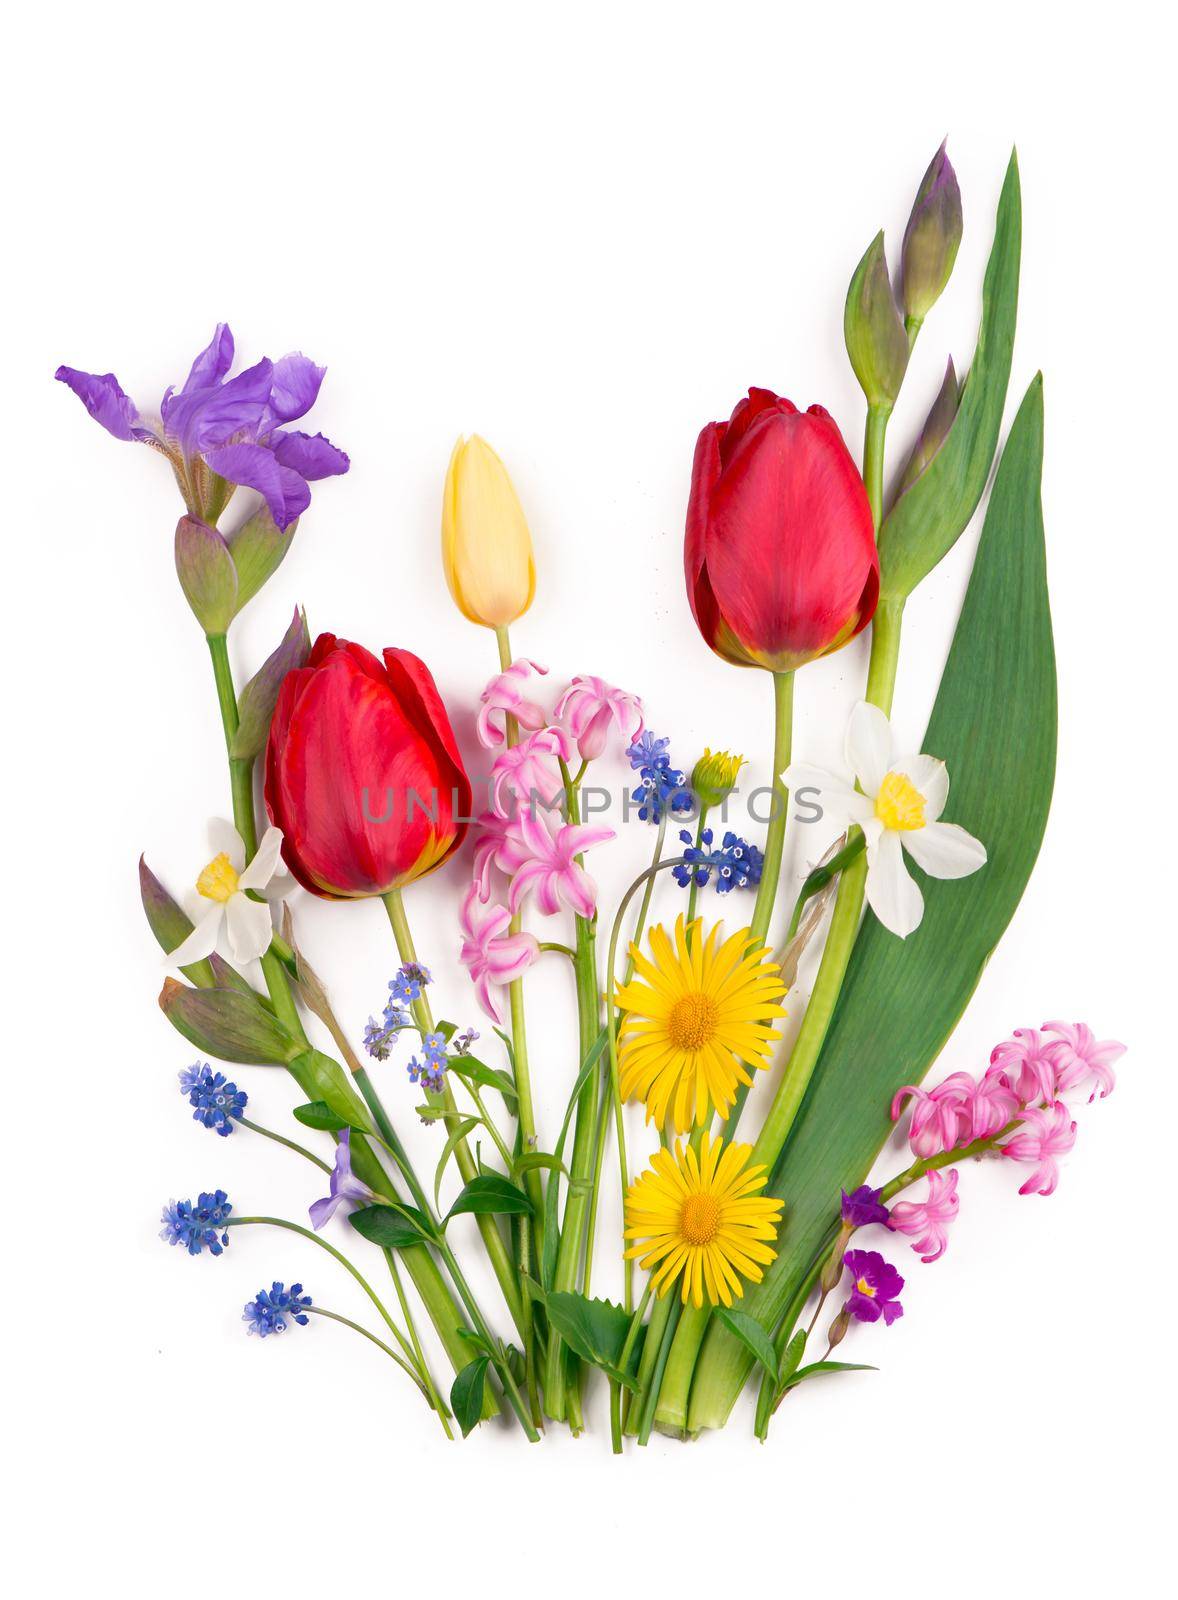 Spring flowers daffodils and tulips on white background by aprilphoto